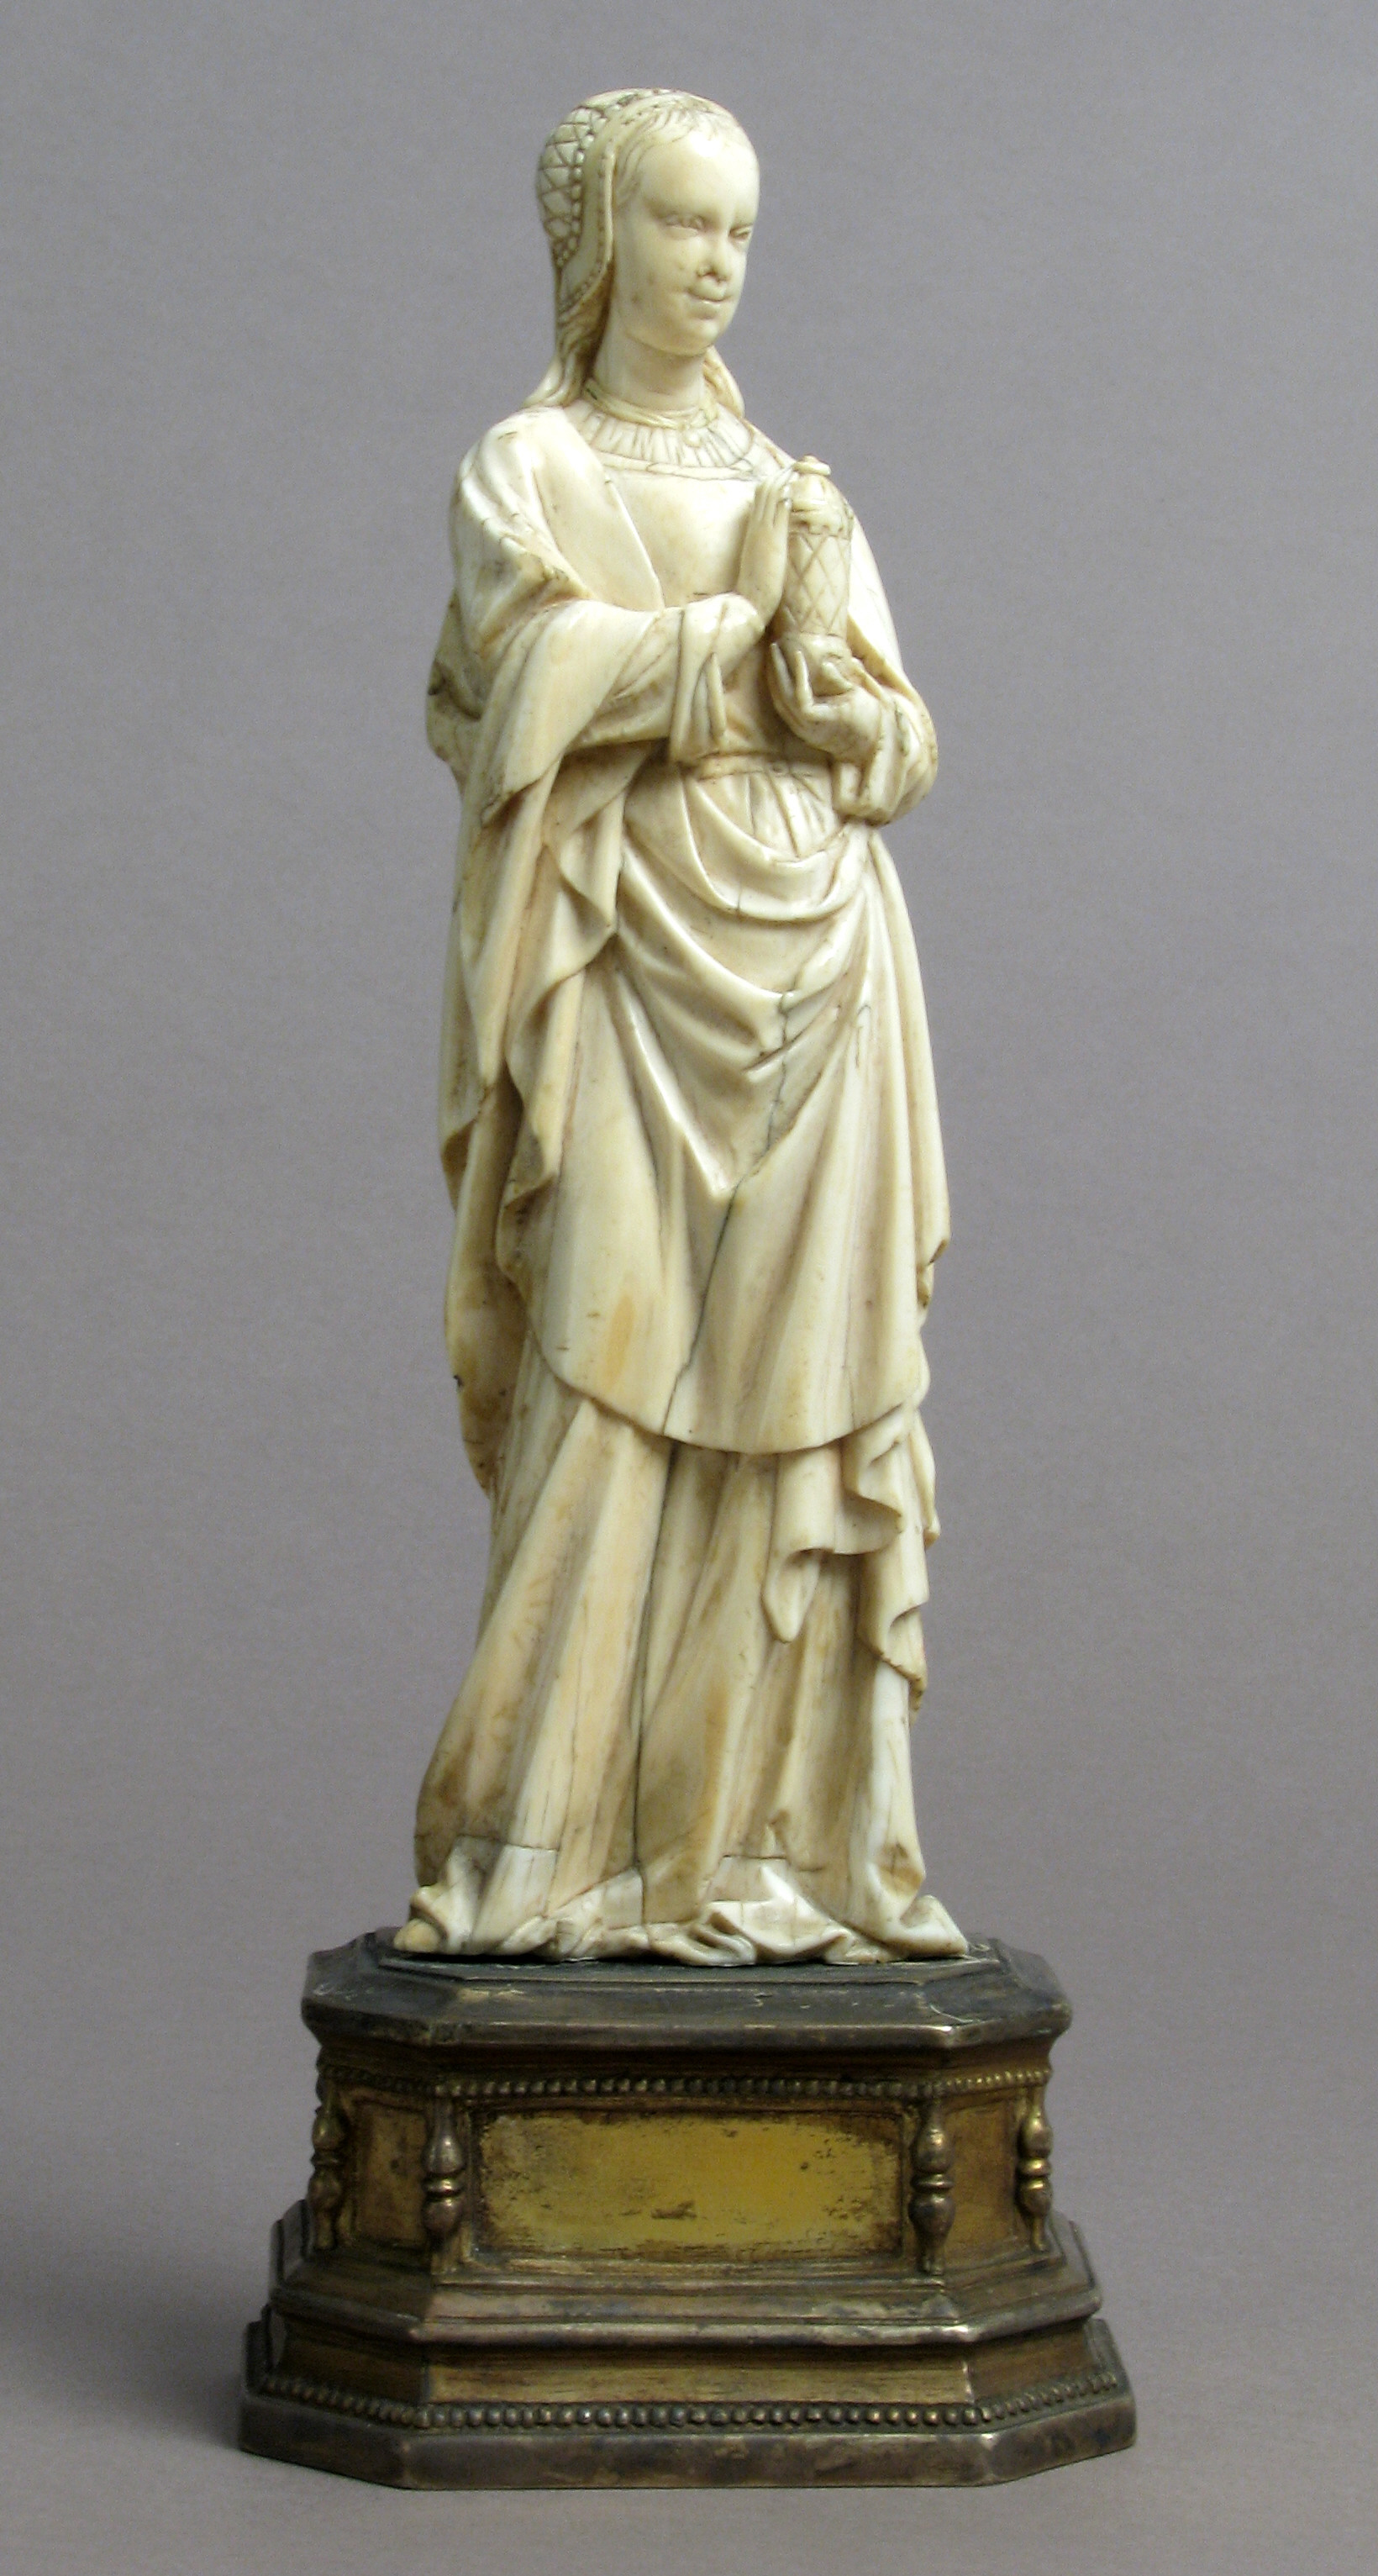 Mary Magdalene | French | The Metropolitan Museum of Art